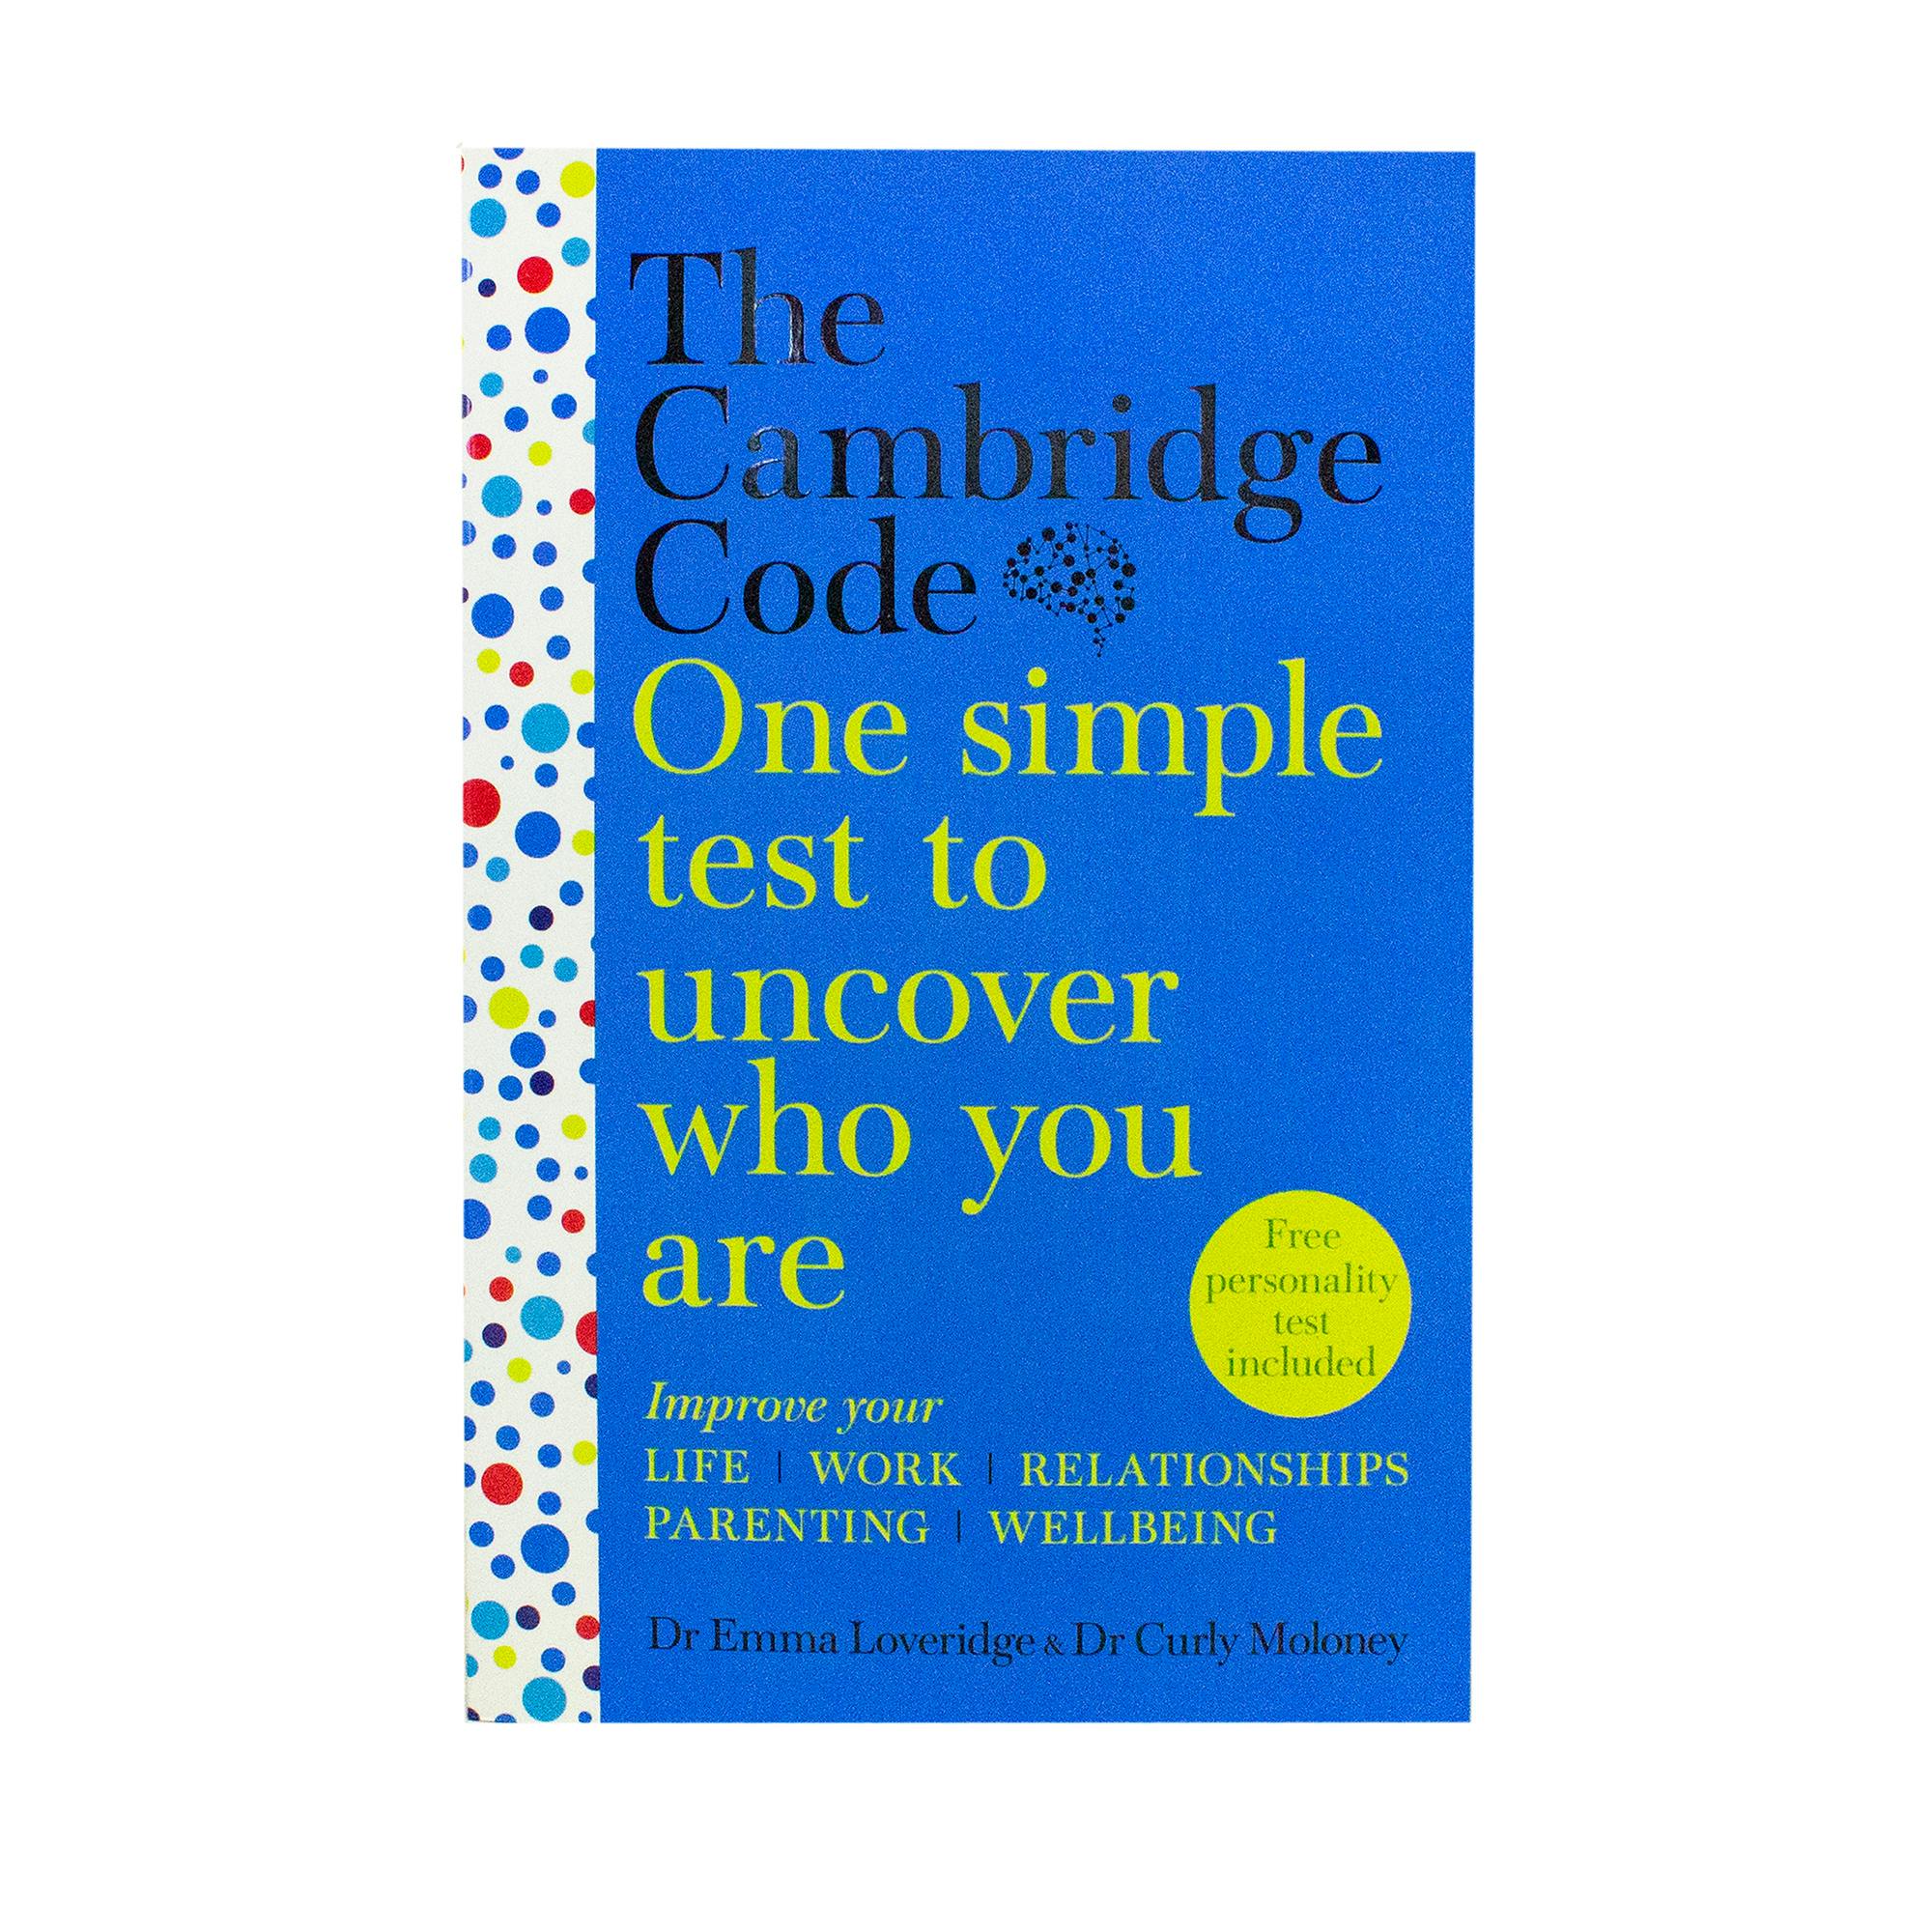 on　Set　Code　OneDayOnly　Connect　The　40%　Cambridge　off　Book